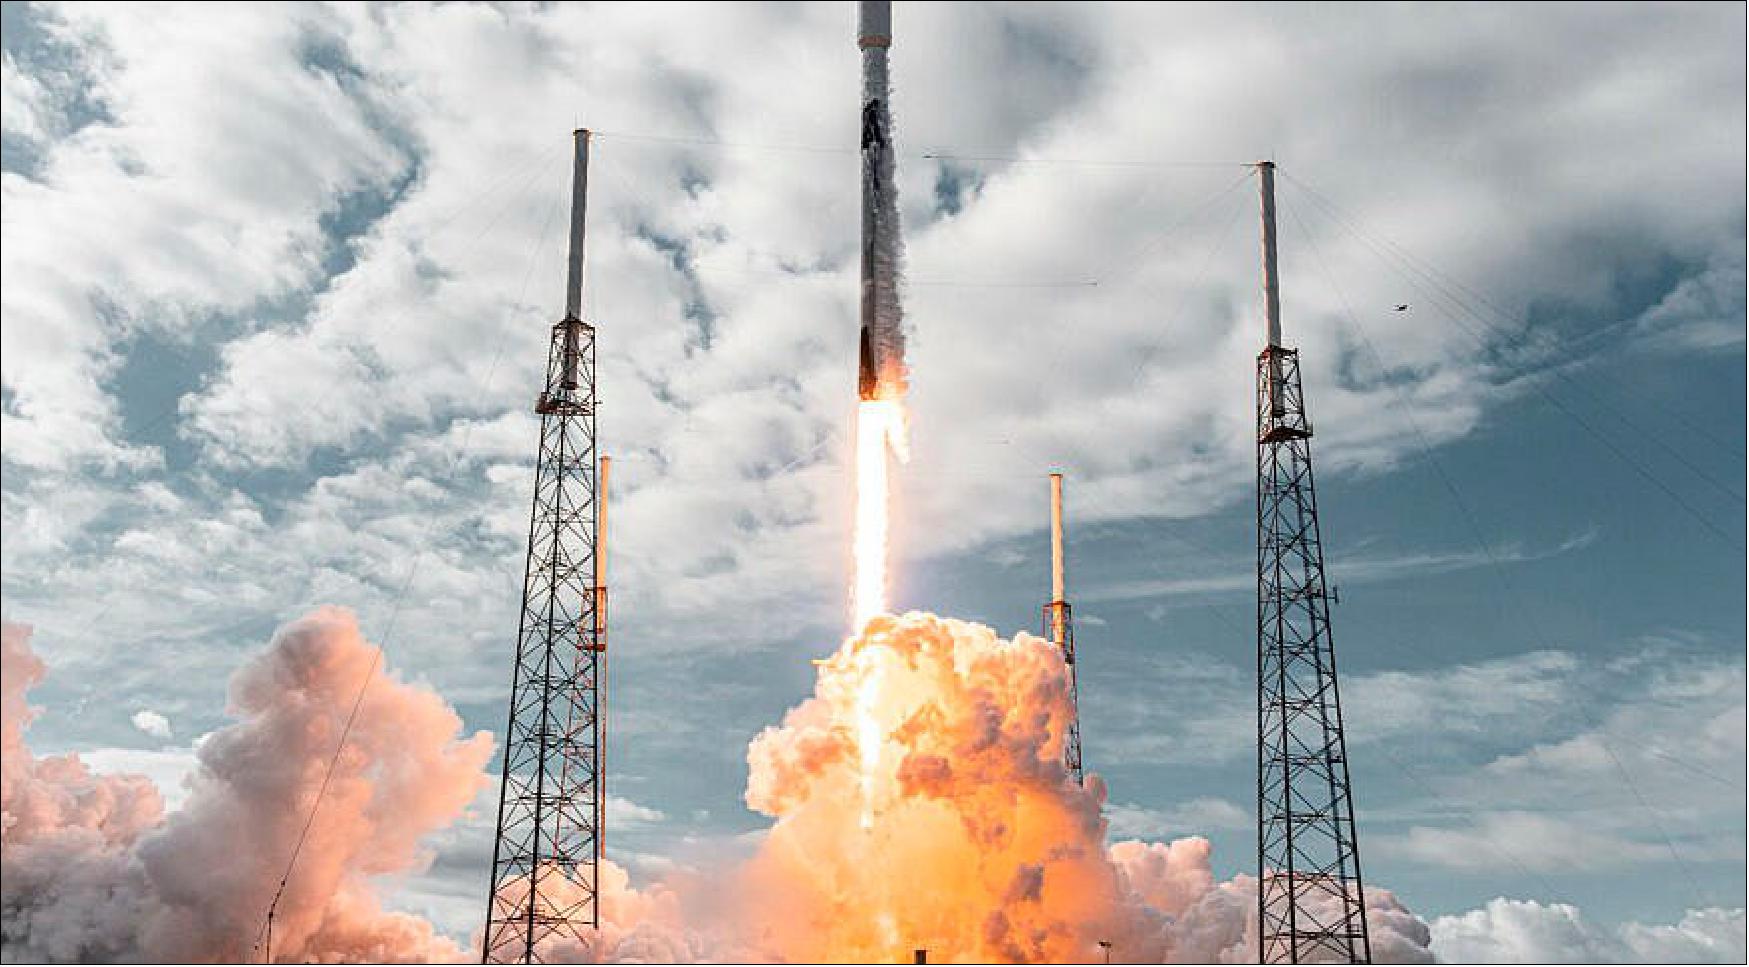 Figure 9: SpaceX on Jan. 24, 2021, launched the Transporter-1 rideshare mission from Space Launch Complex 40 at Cape Canaveral Space Force Station, Florida (image credit: SpaceX)